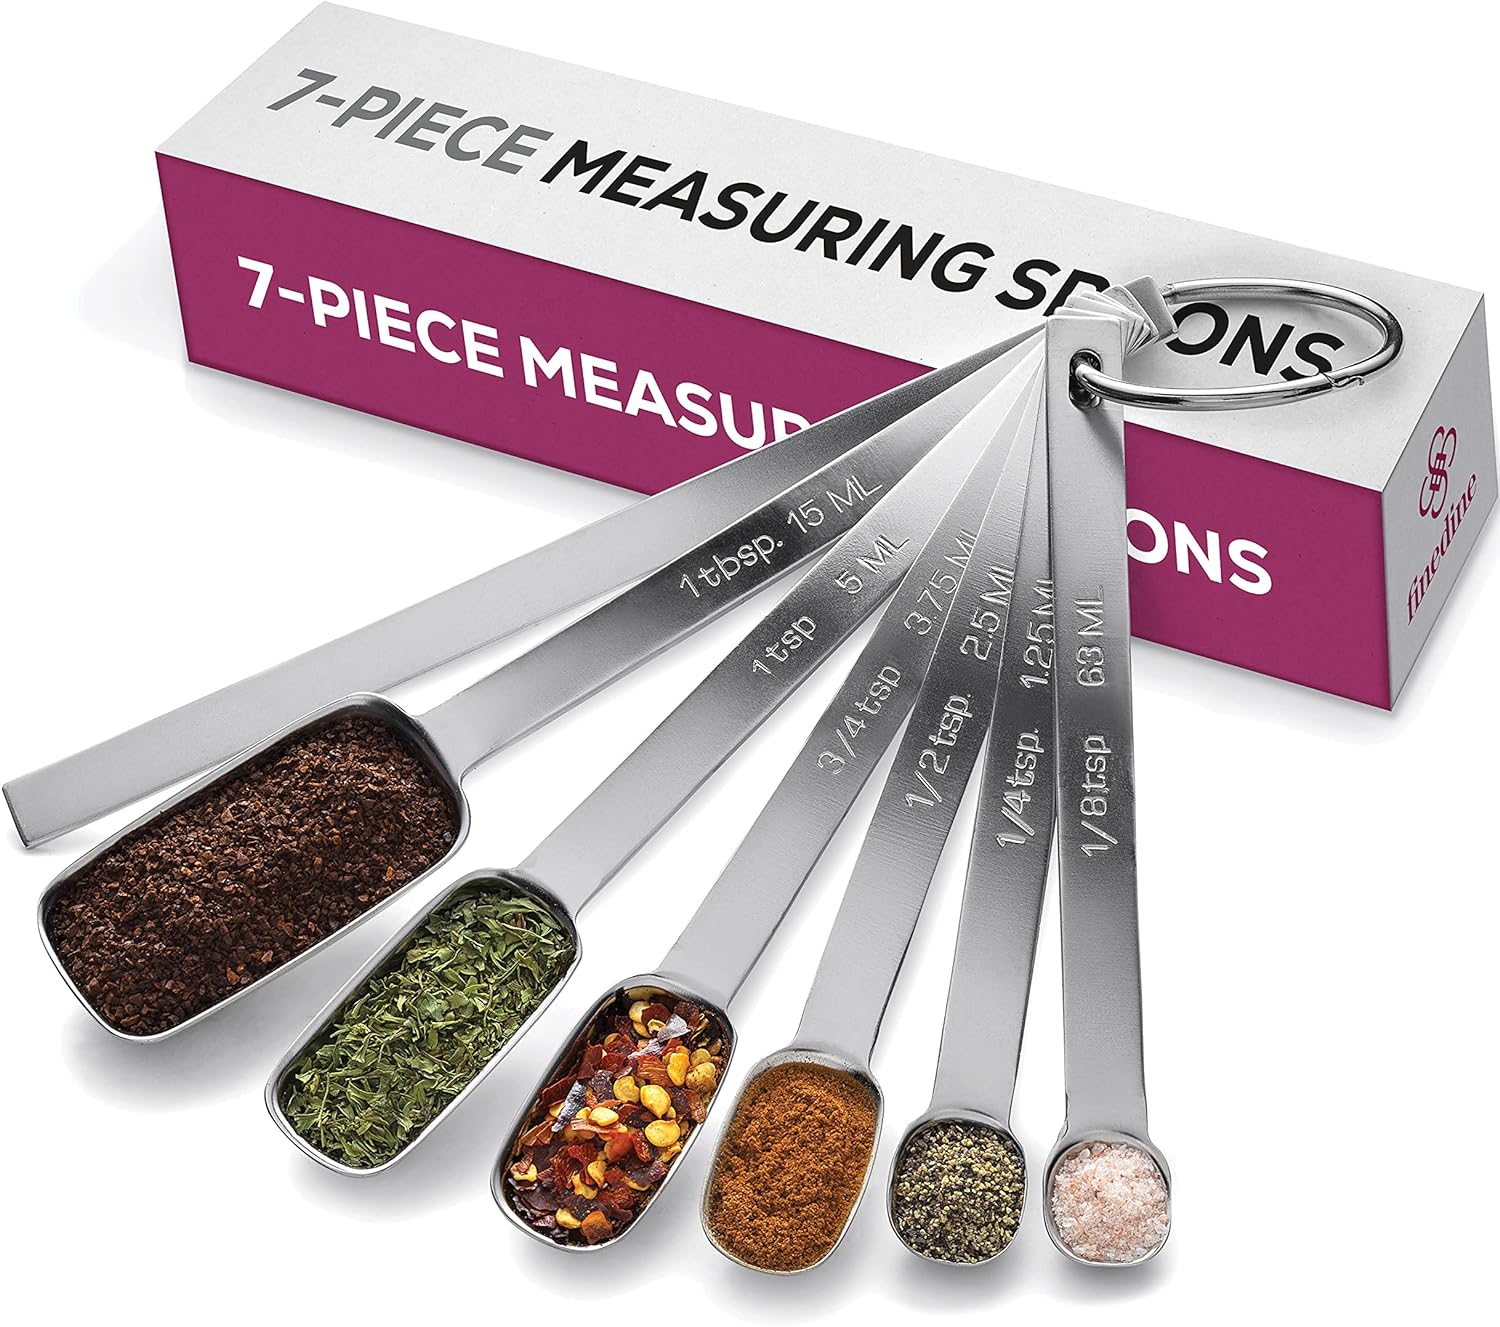 Premium Stainless Steel Measuring Spoons set - 7-Piece Kitchen Measuring Spoons With Leveler - Slim Design Fits In Spice Jars - Metal Measuring Spoon Set for Dry, Liquid Ingredients Cooking & Baking.